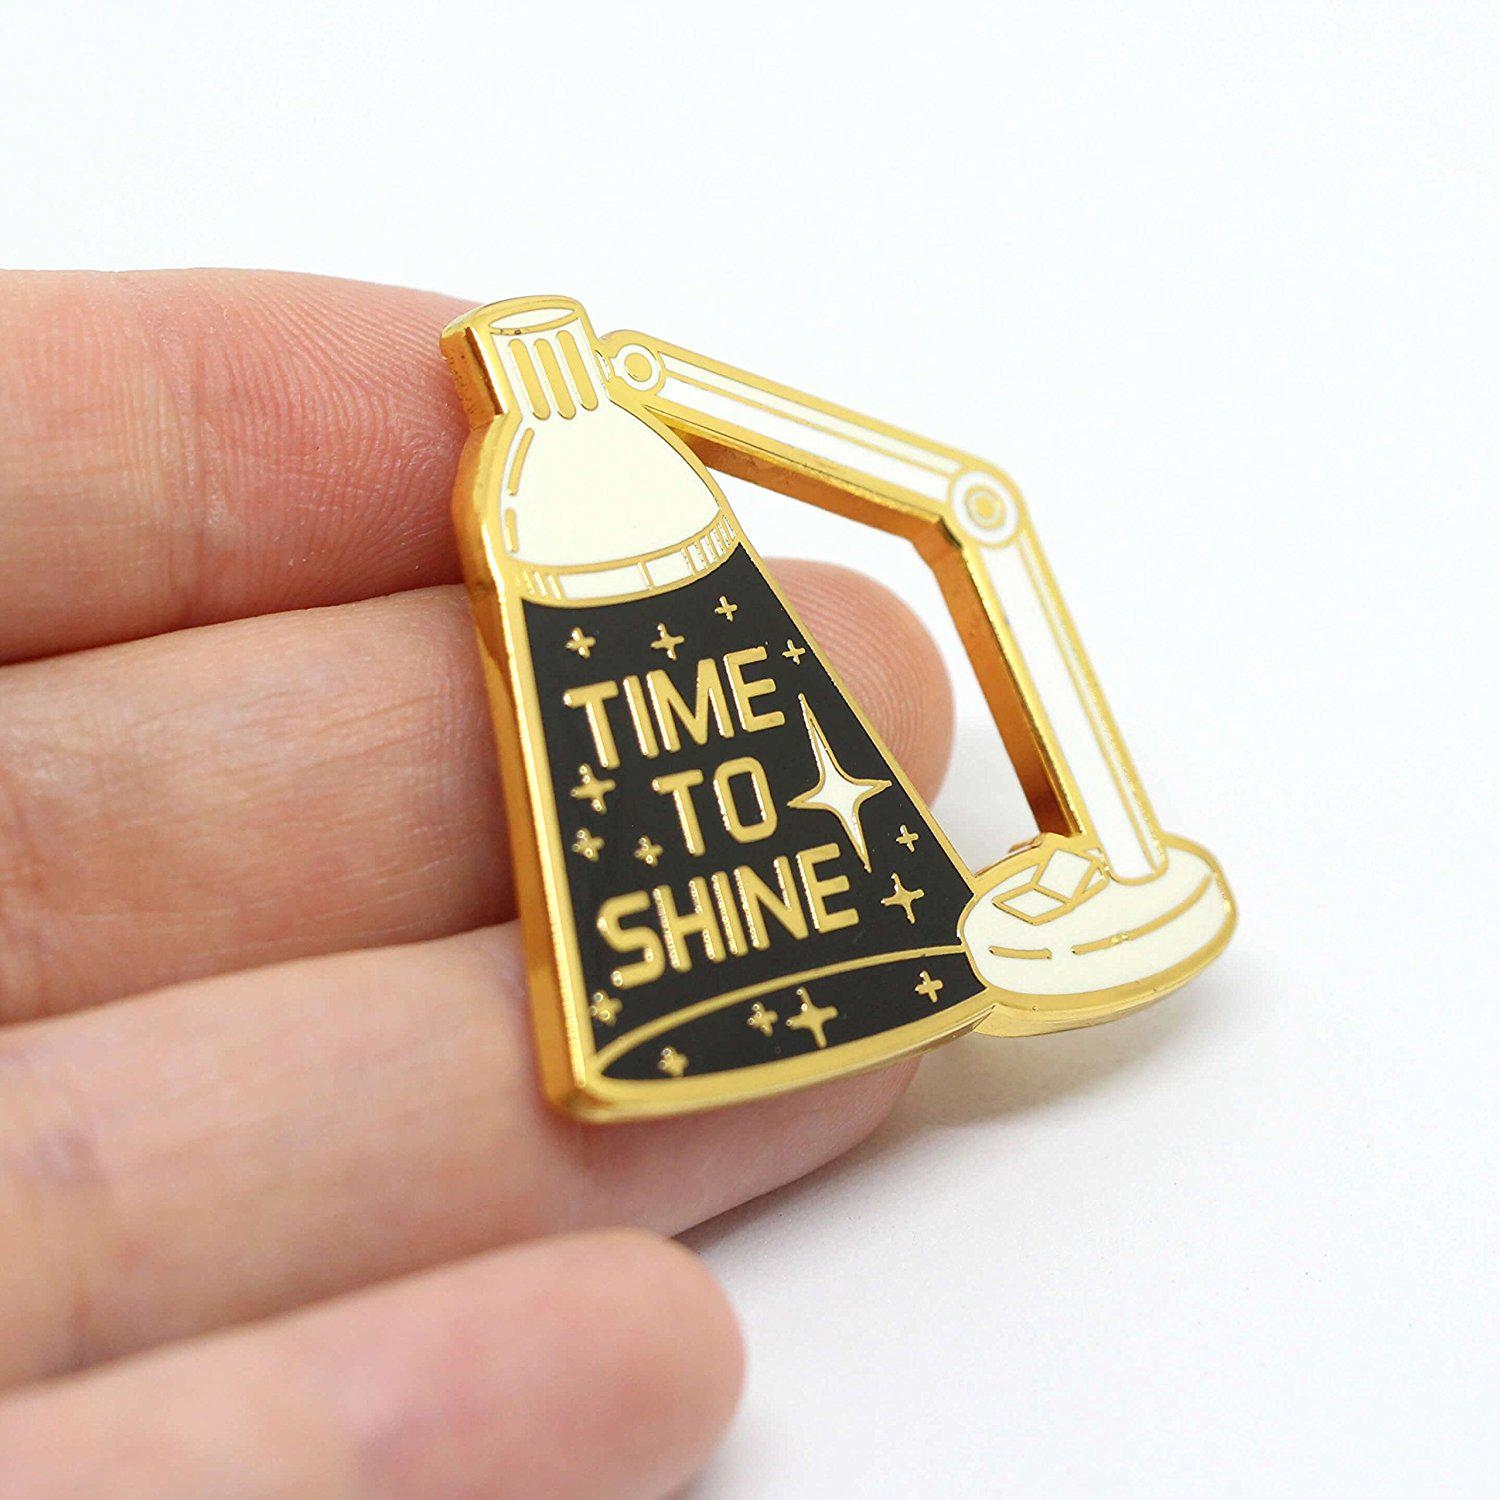 Space inspired enamel pin inspirational lapel pin time to shine Best ...